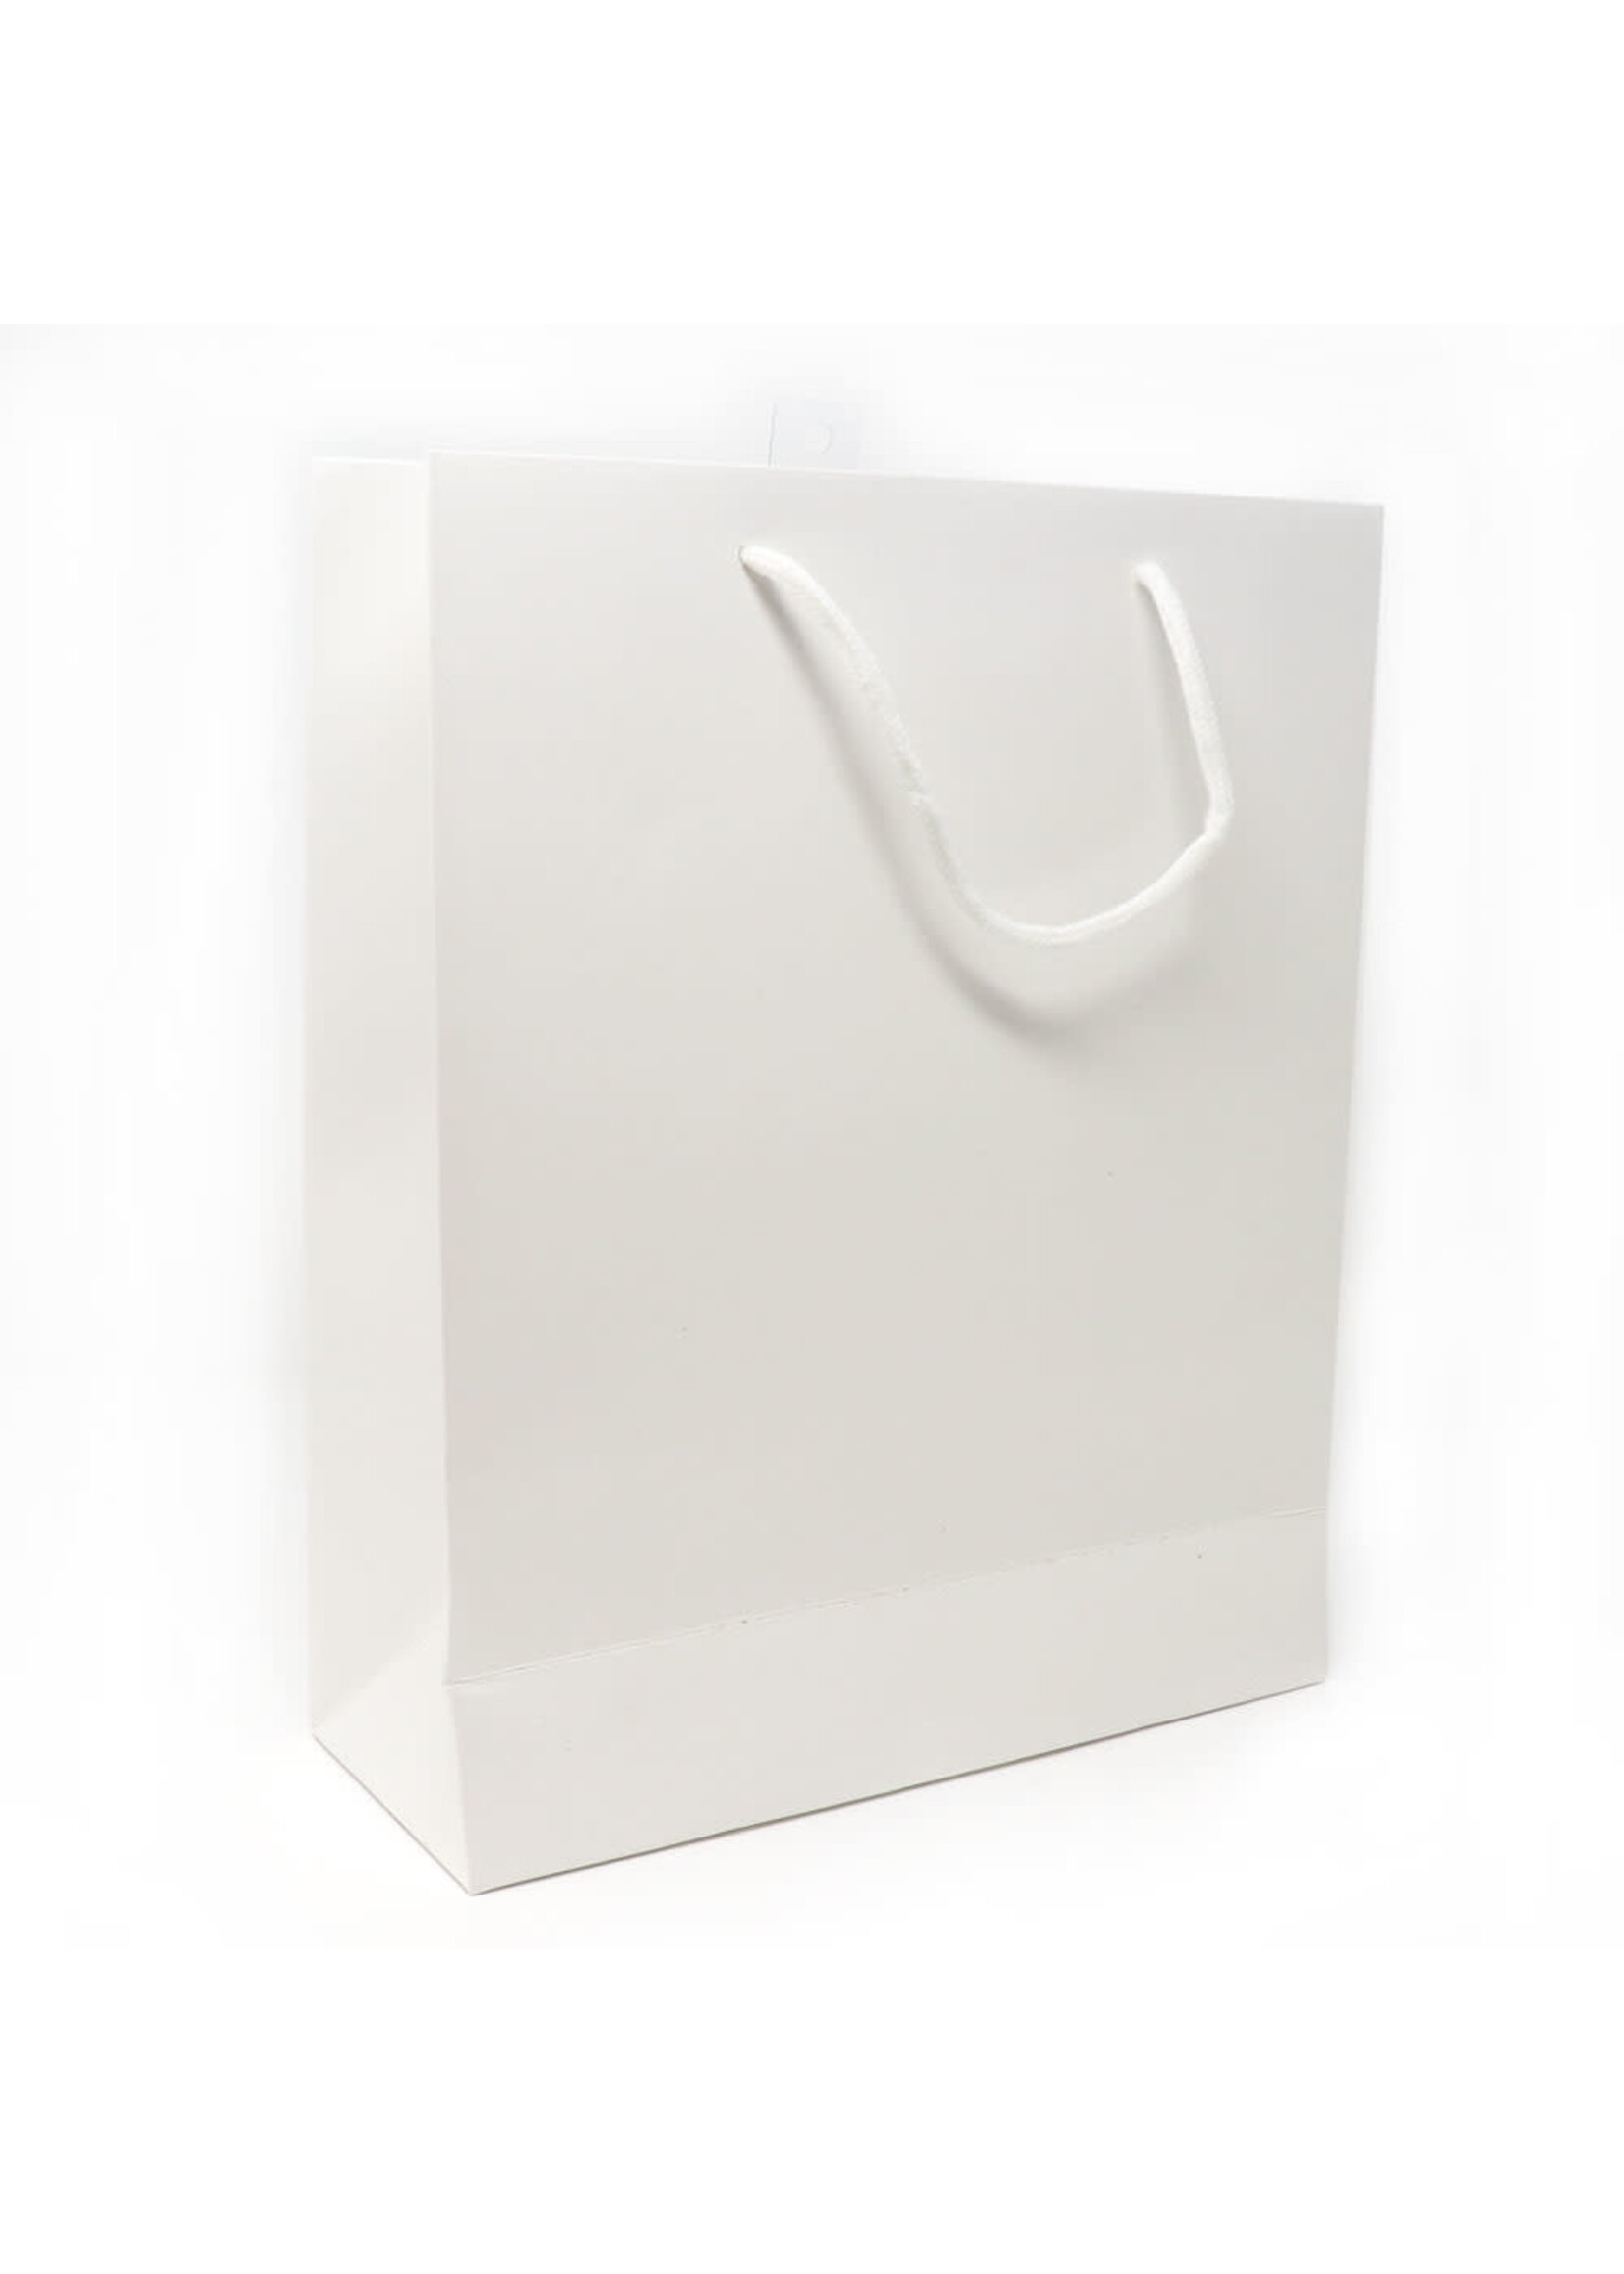 SOLID WHITE GIFT BAG LARGE 12" X 16.5" X 4.75"